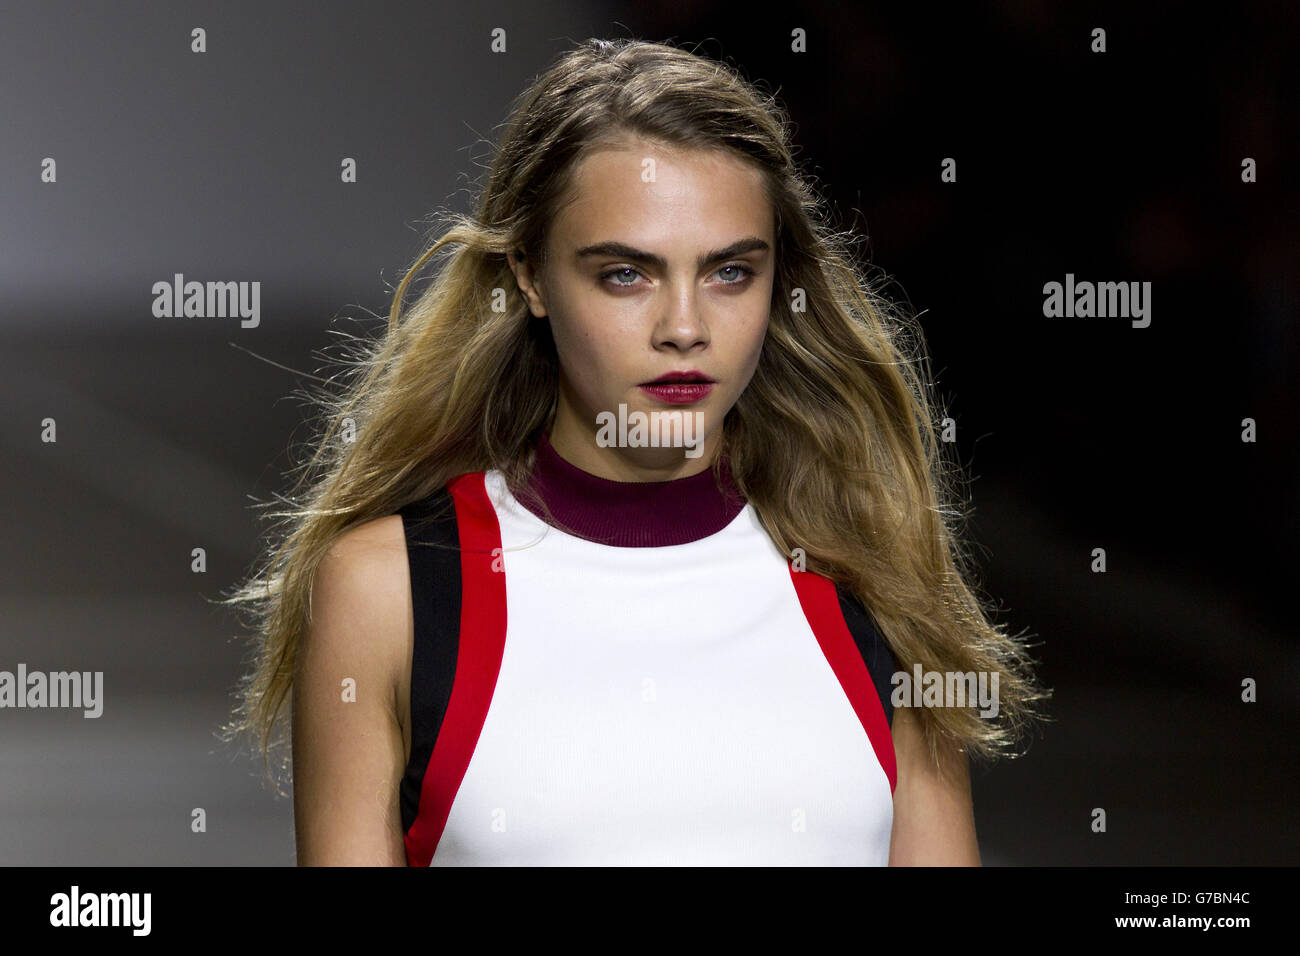 Cara Delevingne in the Topshop catwalk show at the Topshop Show Space in London during London Fashion Week. Stock Photo